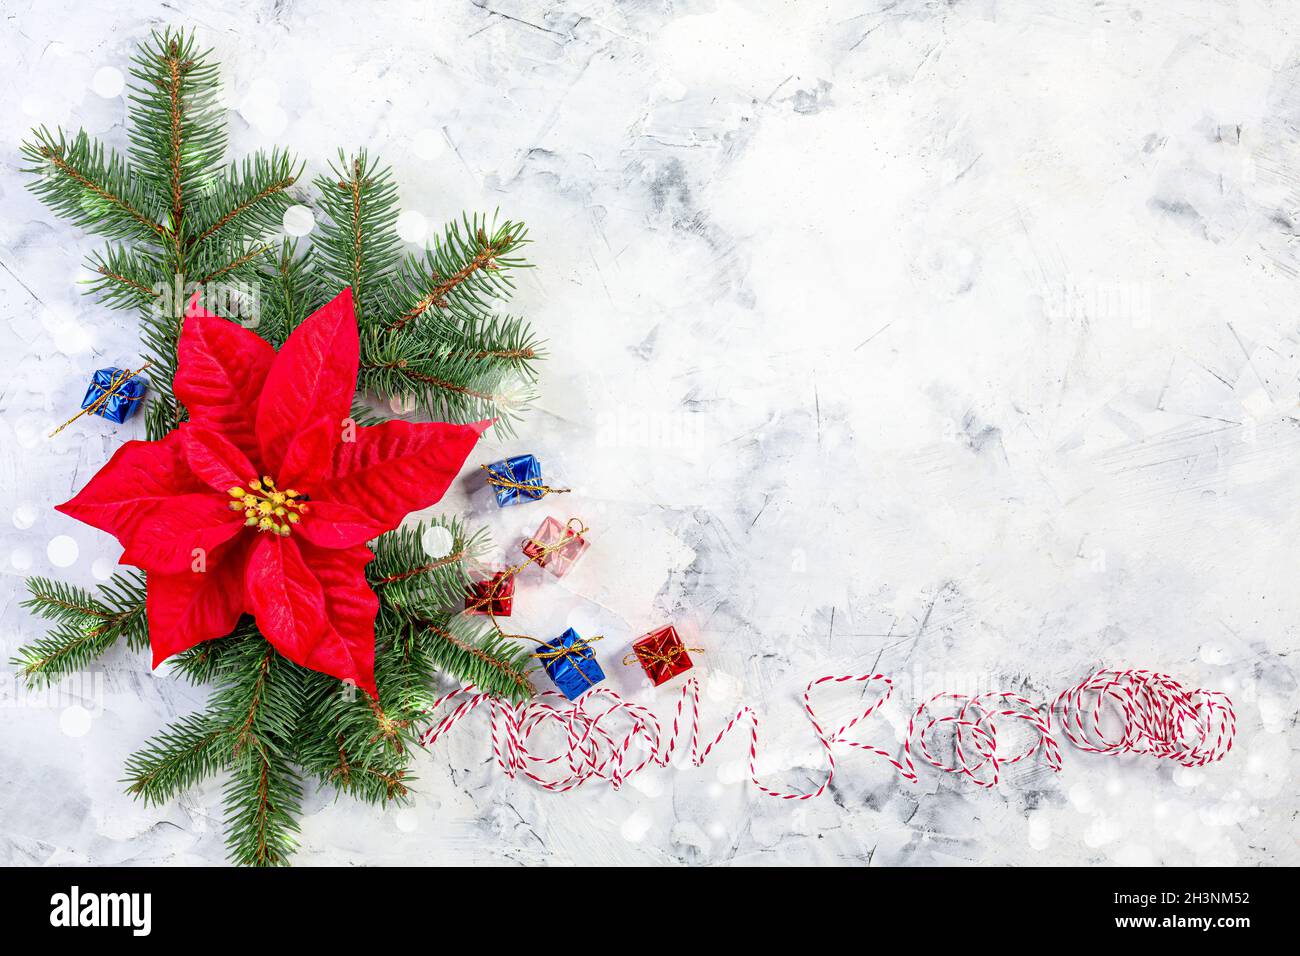 Composition with Christmas flower poinsettia. Stock Photo